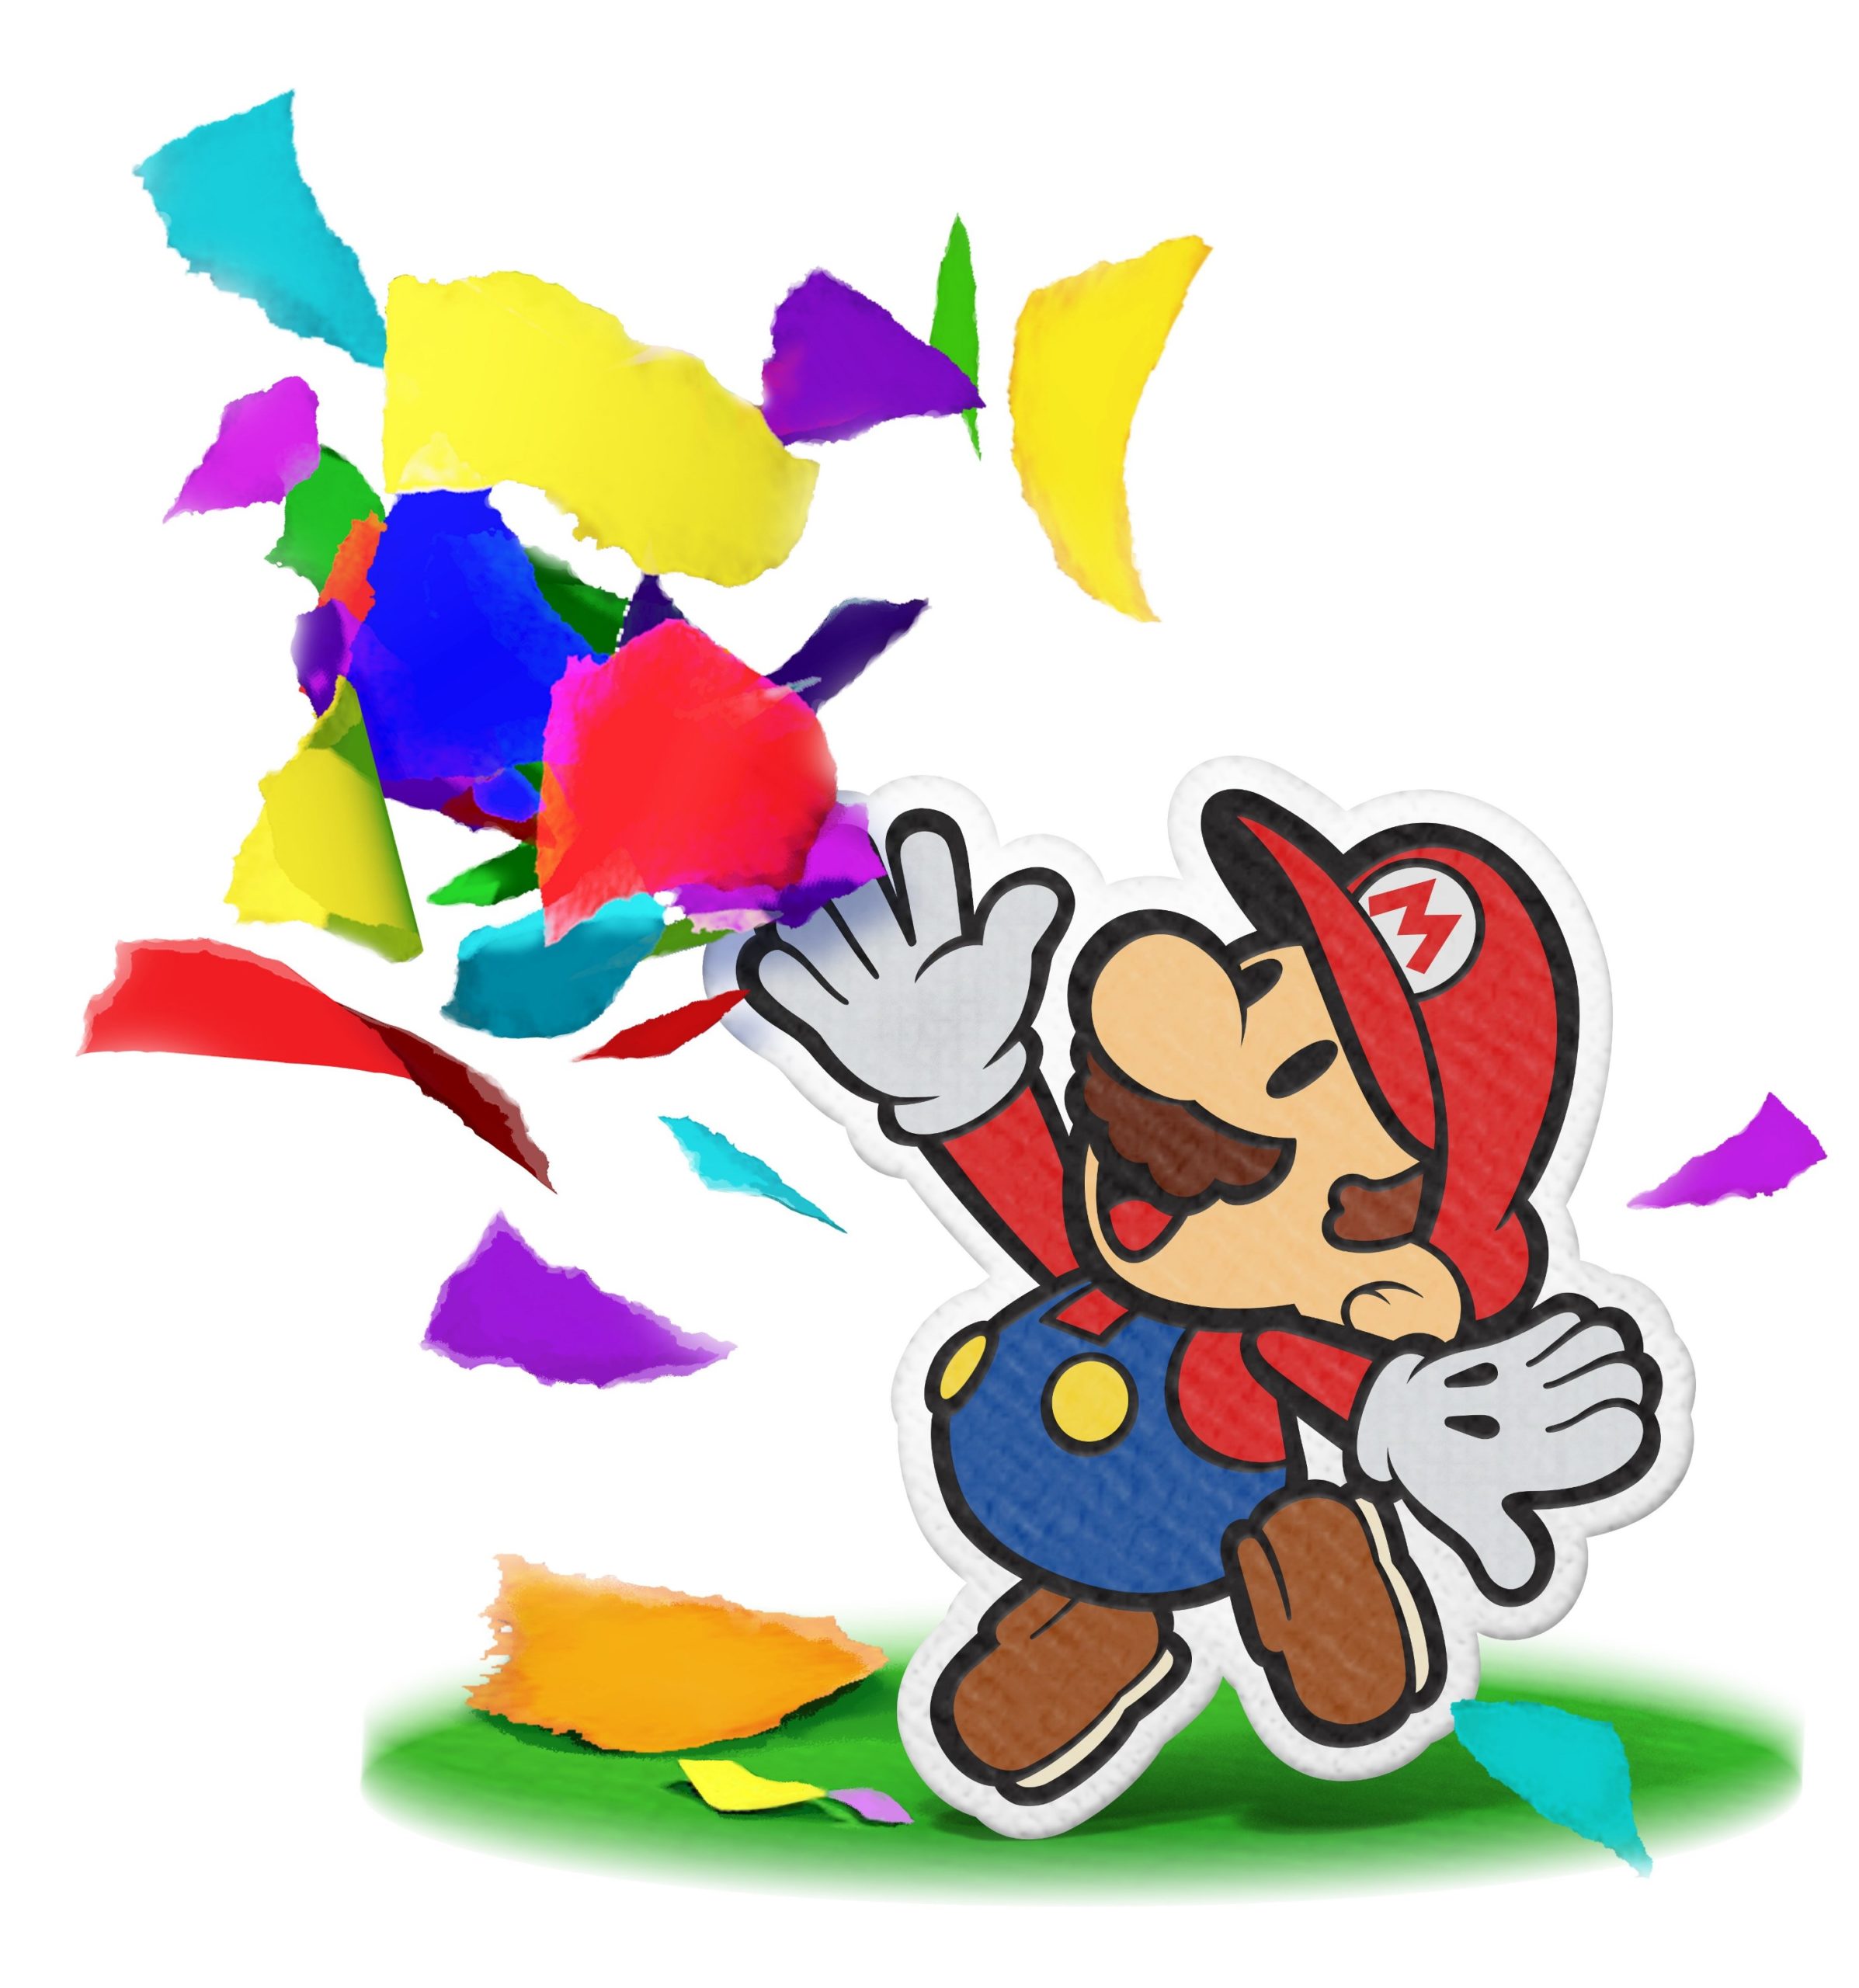 Tons of Paper Mario The Origami King character art